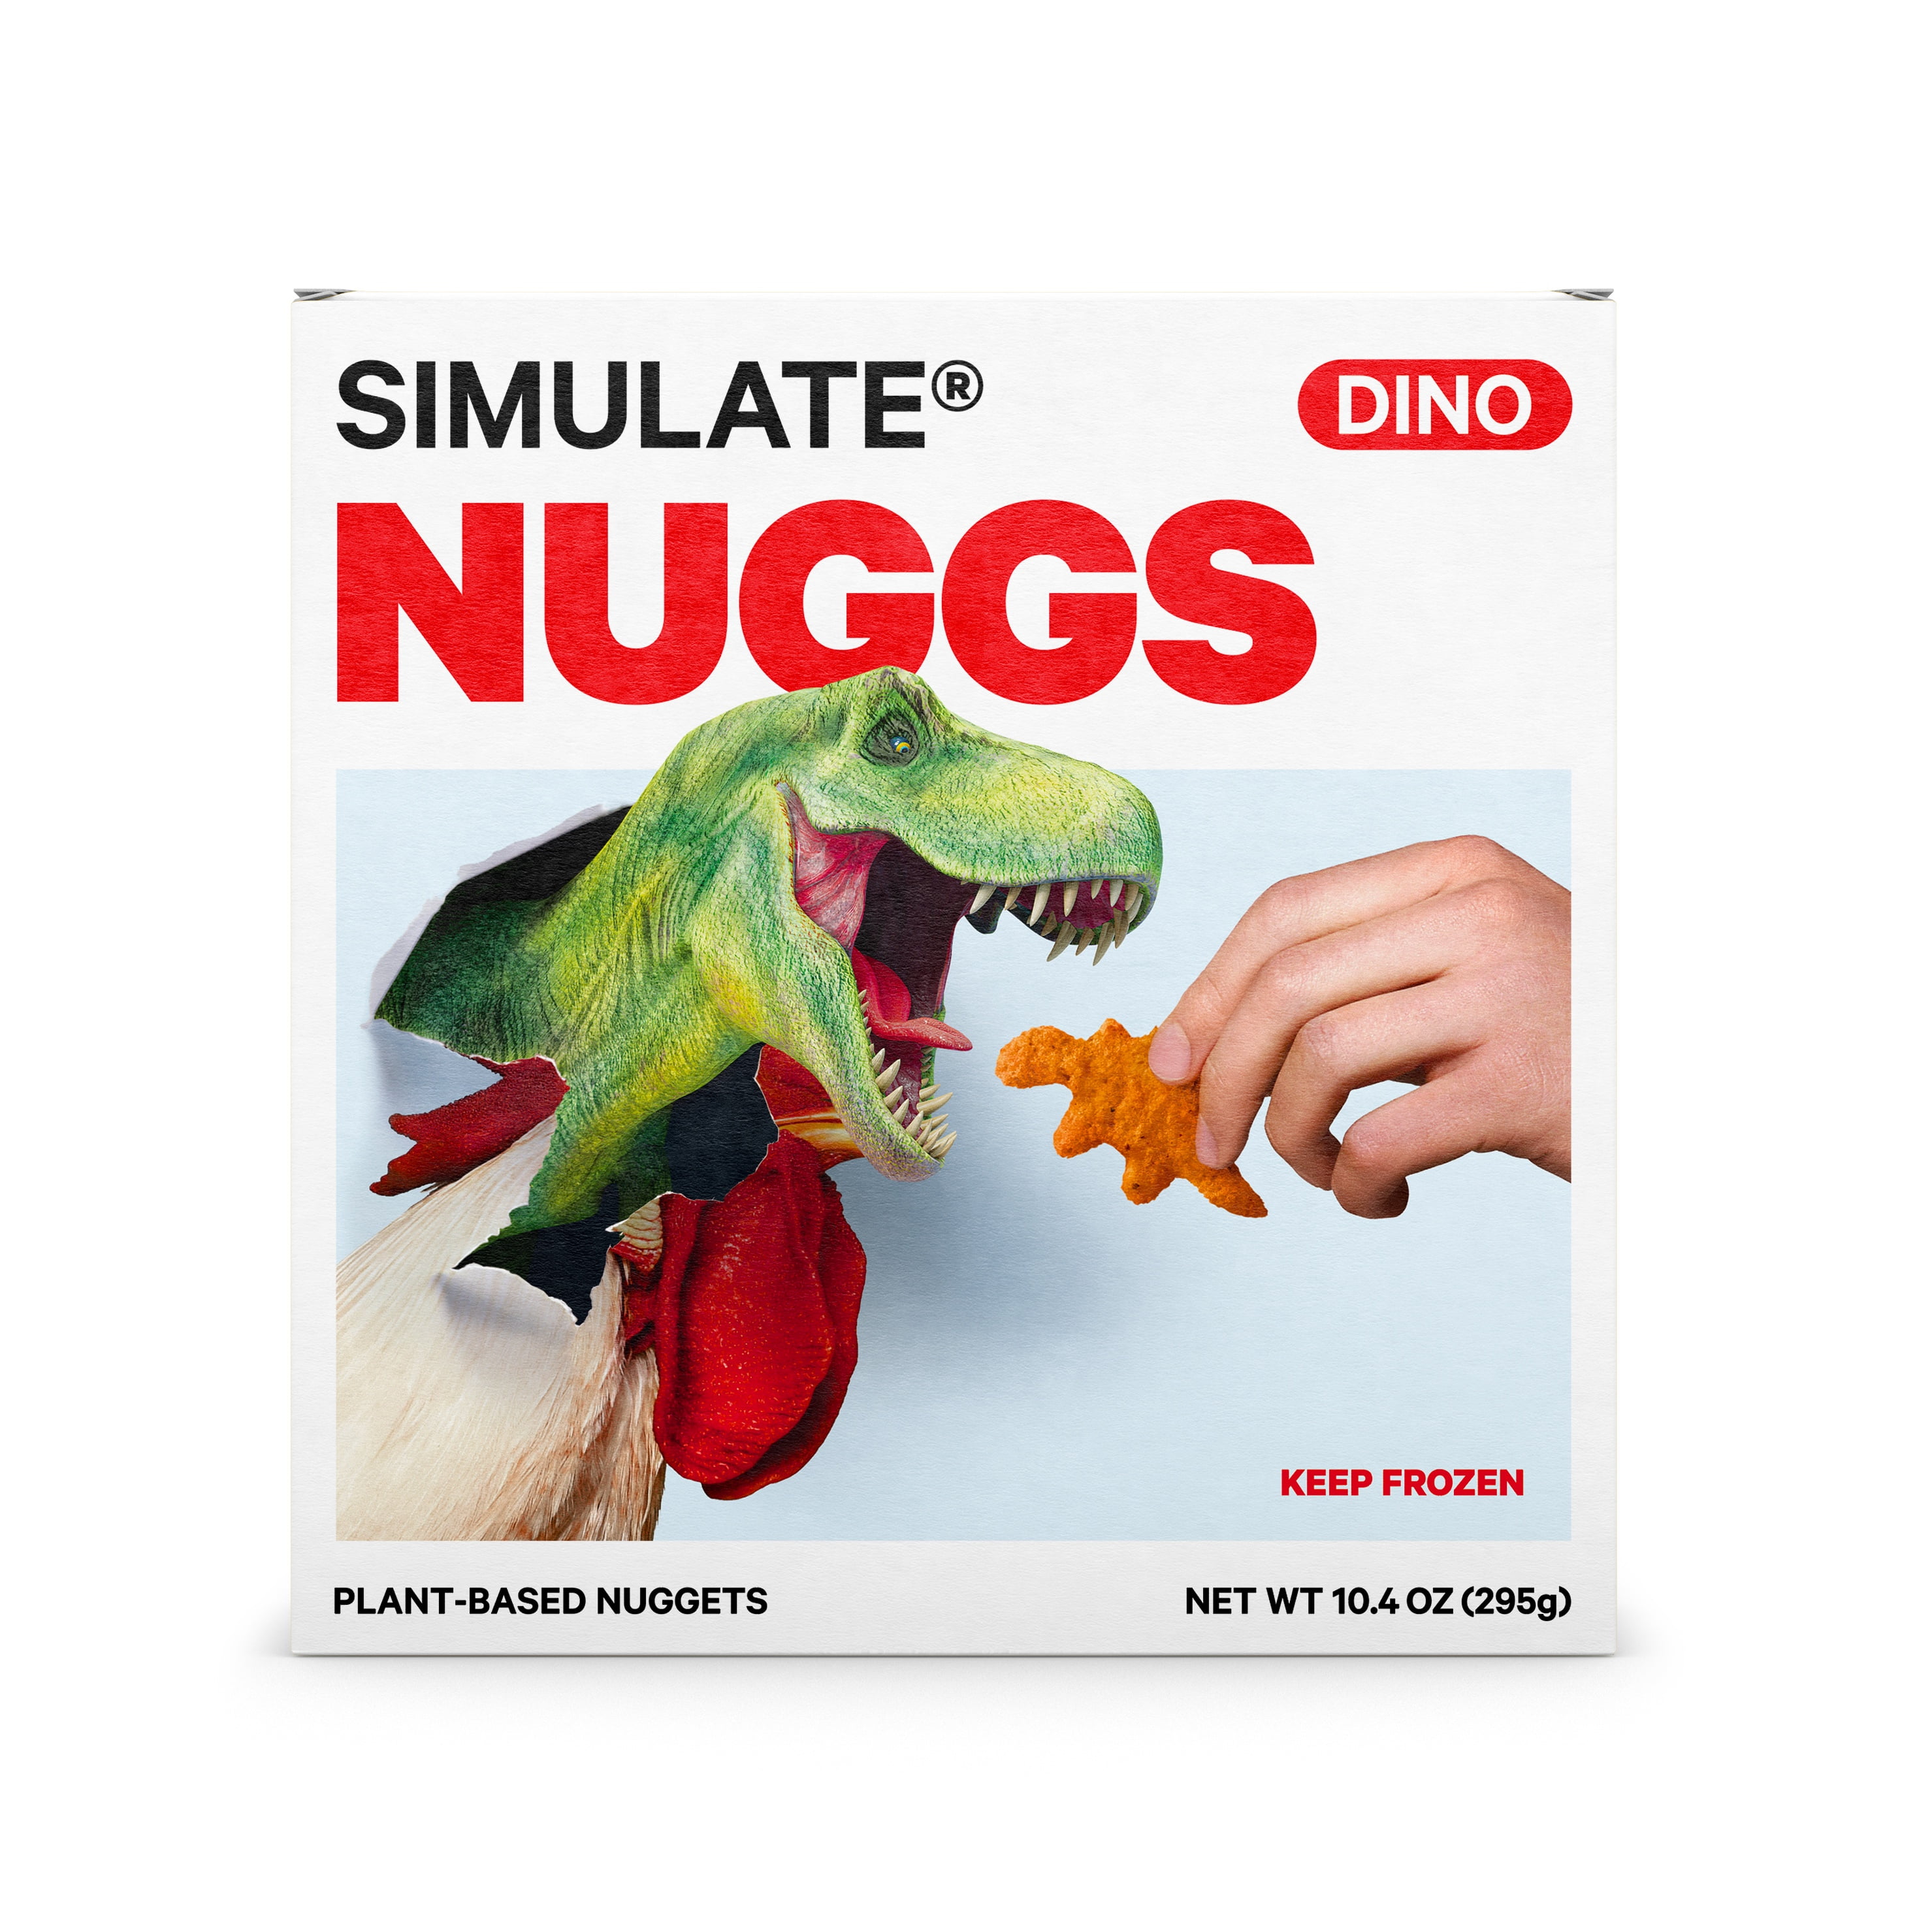 simulate-nuggs-plant-based-meat-dino-chicken-nuggets-10-4-oz-frozen